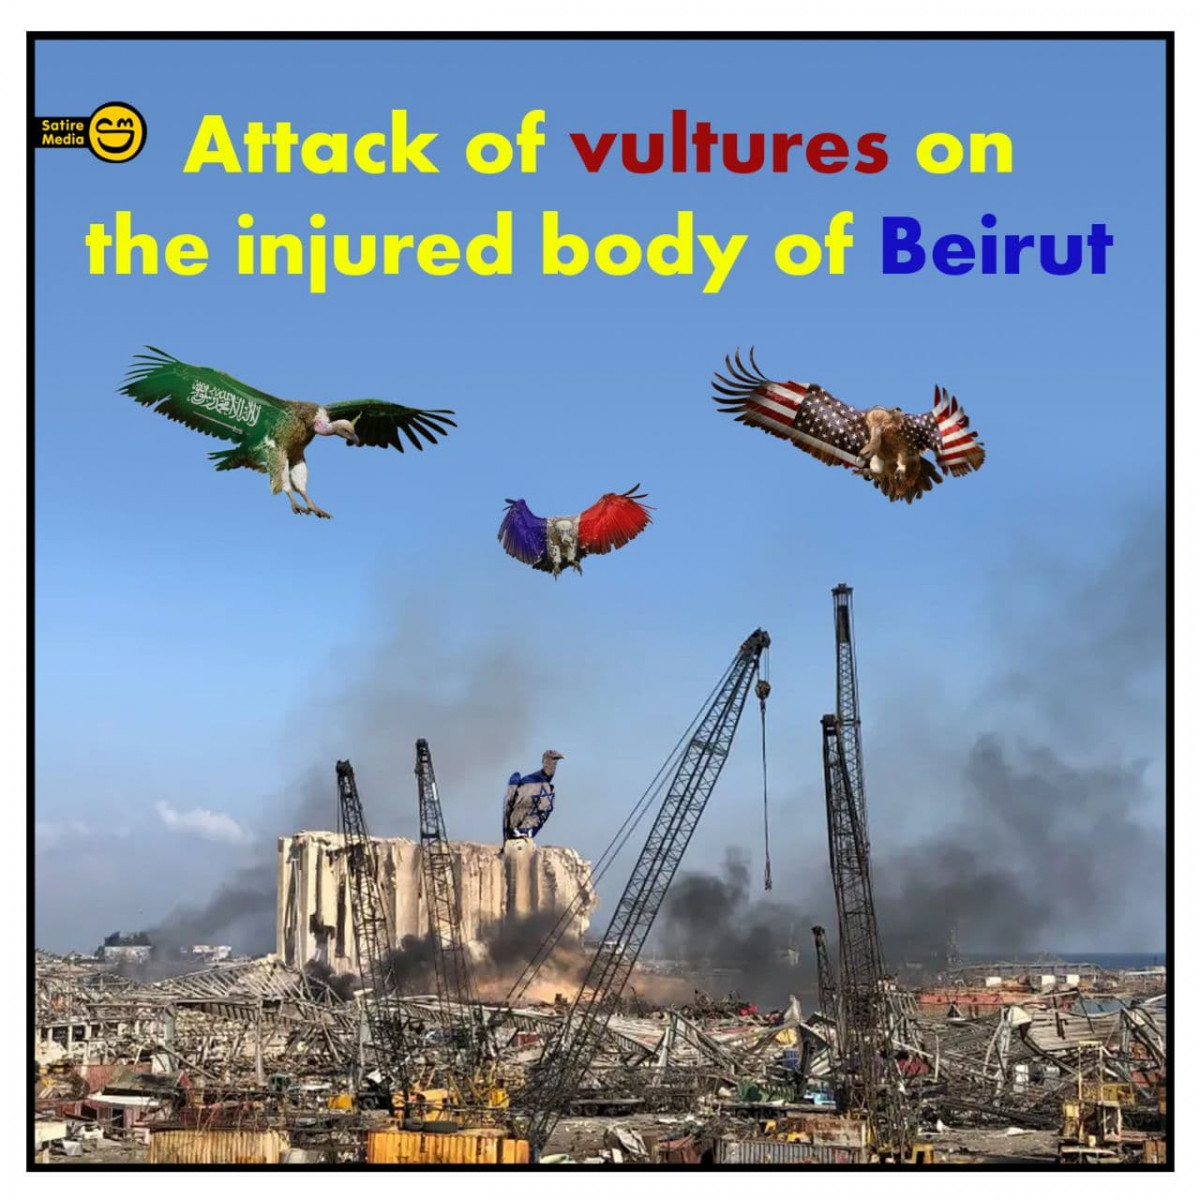 Attack of vultures on the injured body of Beirut